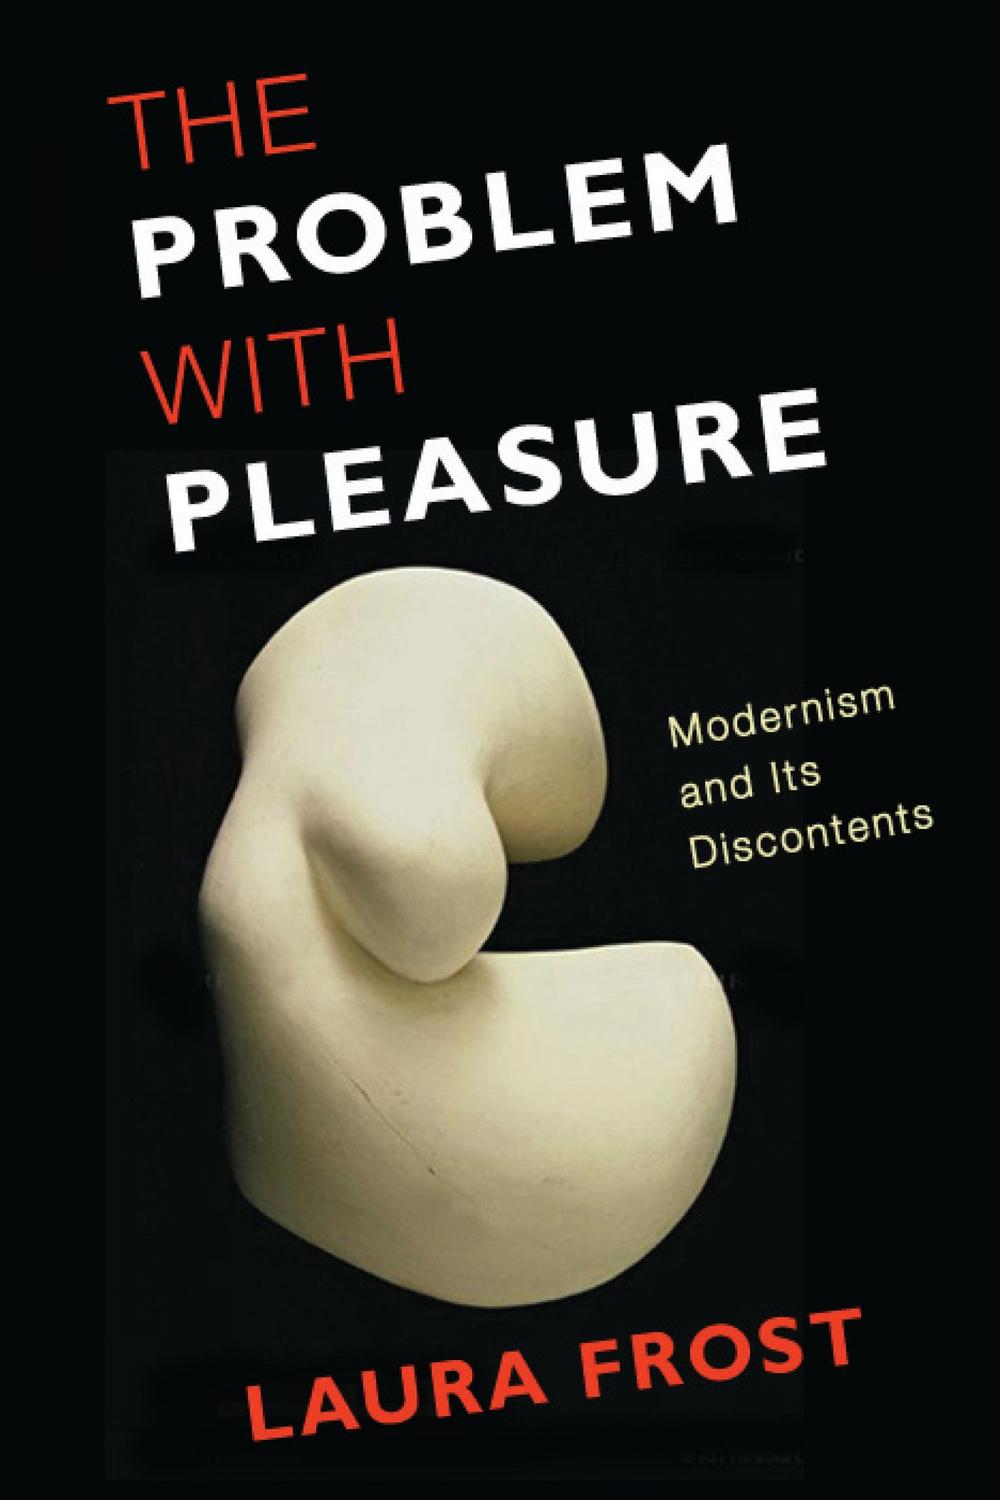 The Problem with Pleasure - Laura Frost